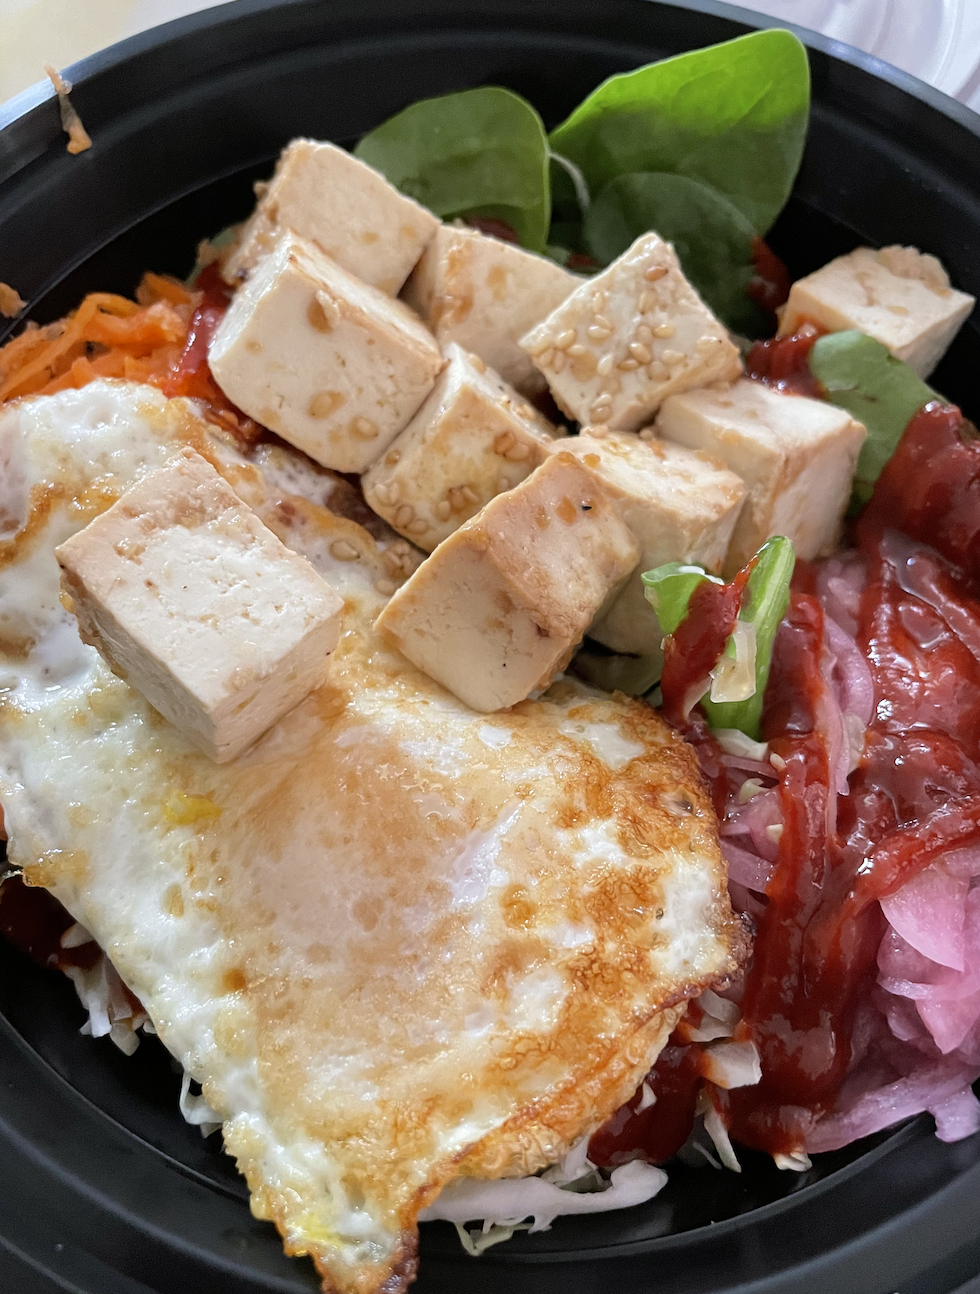 For a veggie-packed meal that keeps you full, the tofu bibimbap from Topped Waikiki is a great choice for under $15.